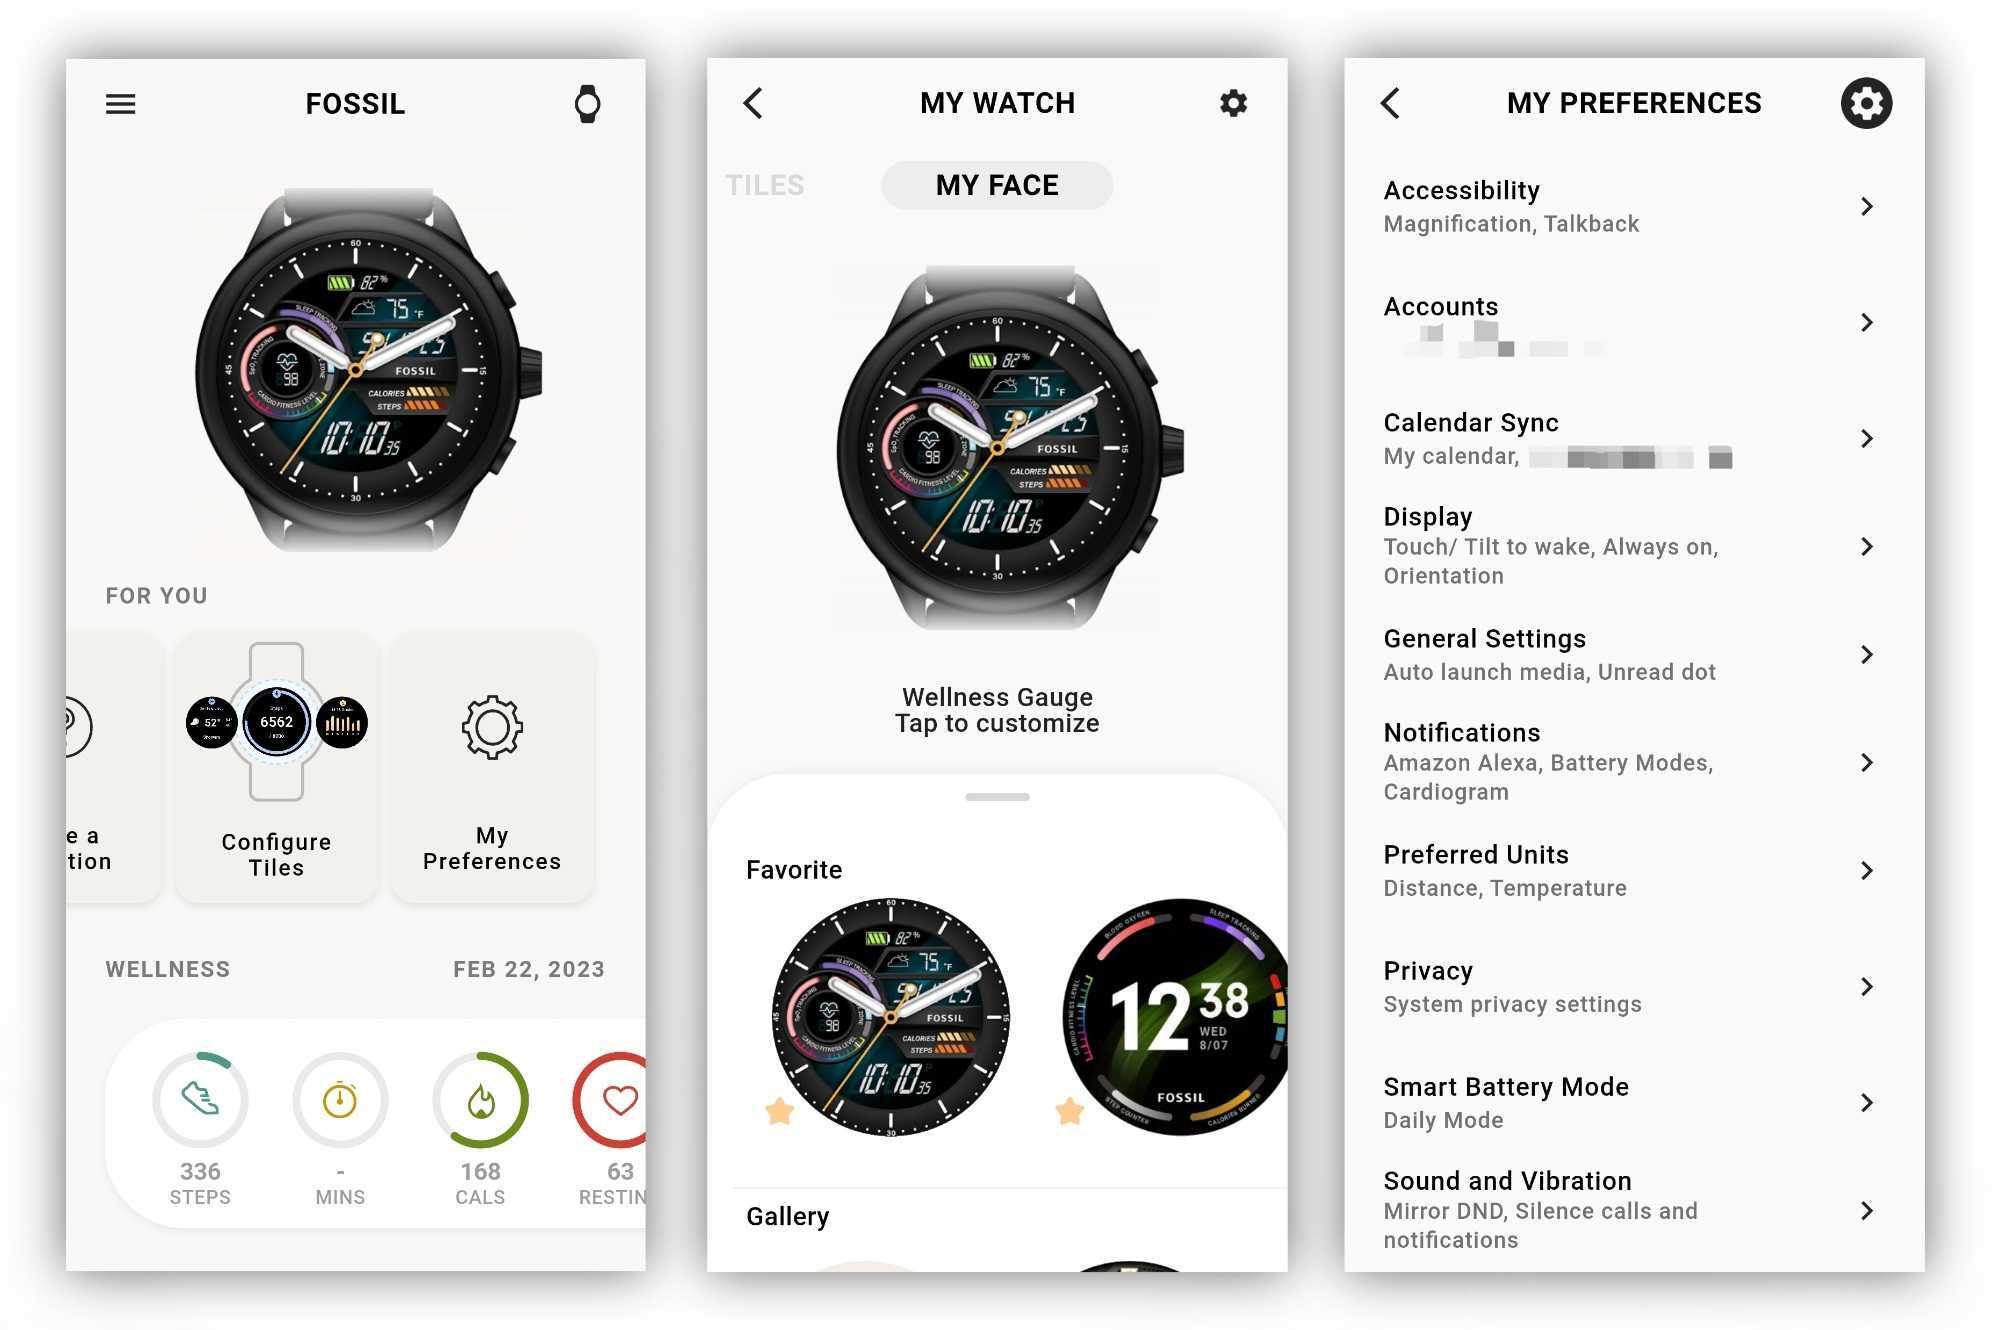 Access settings in the Fossil Smartwatches app